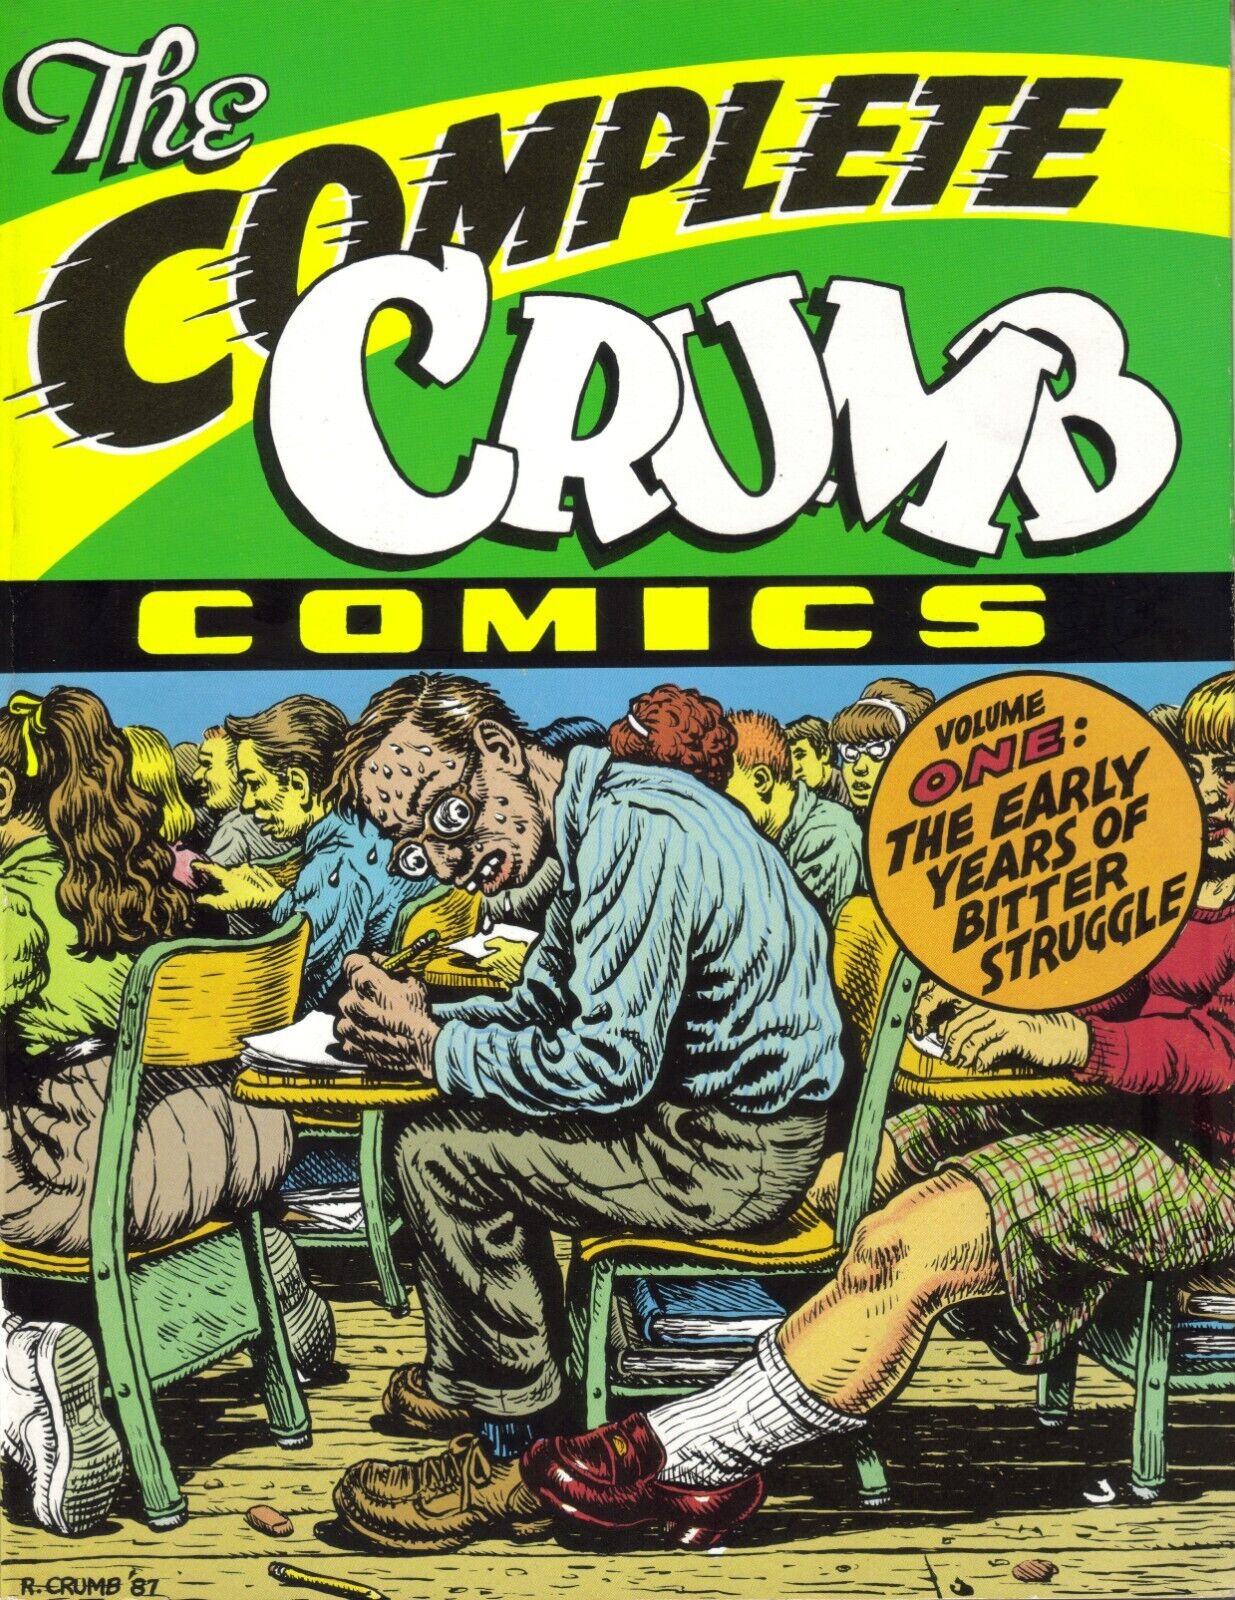 THE COMPLETE CRUMB 10 TPB ON CD-ROM FREE with Art Purchase